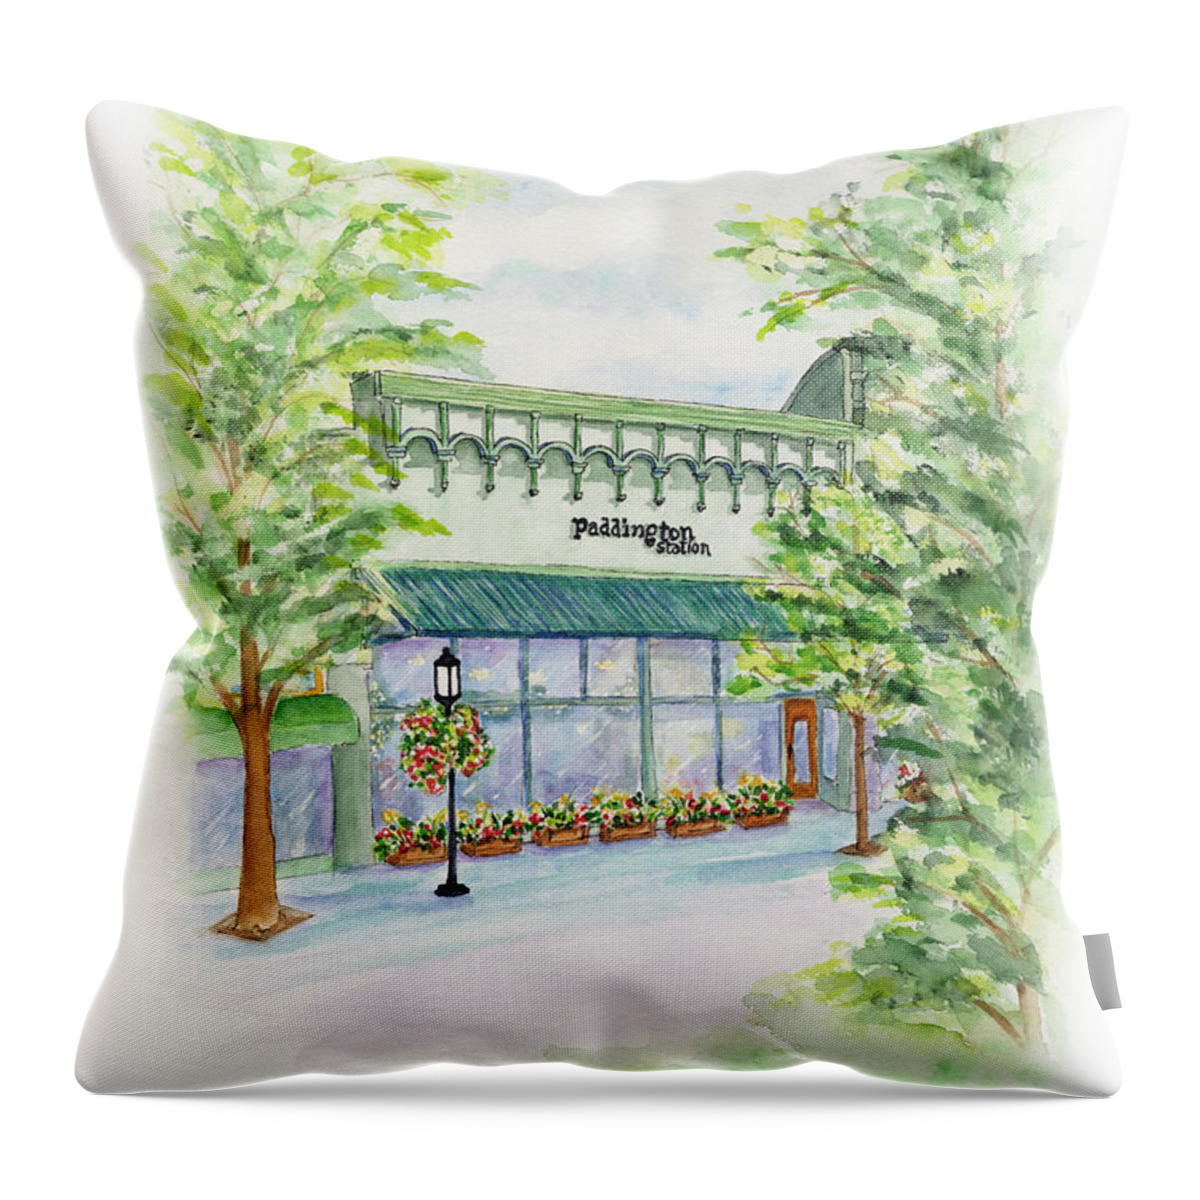 Paddington Station Gift Store Throw Pillow featuring the painting Paddington Station by Lori Taylor